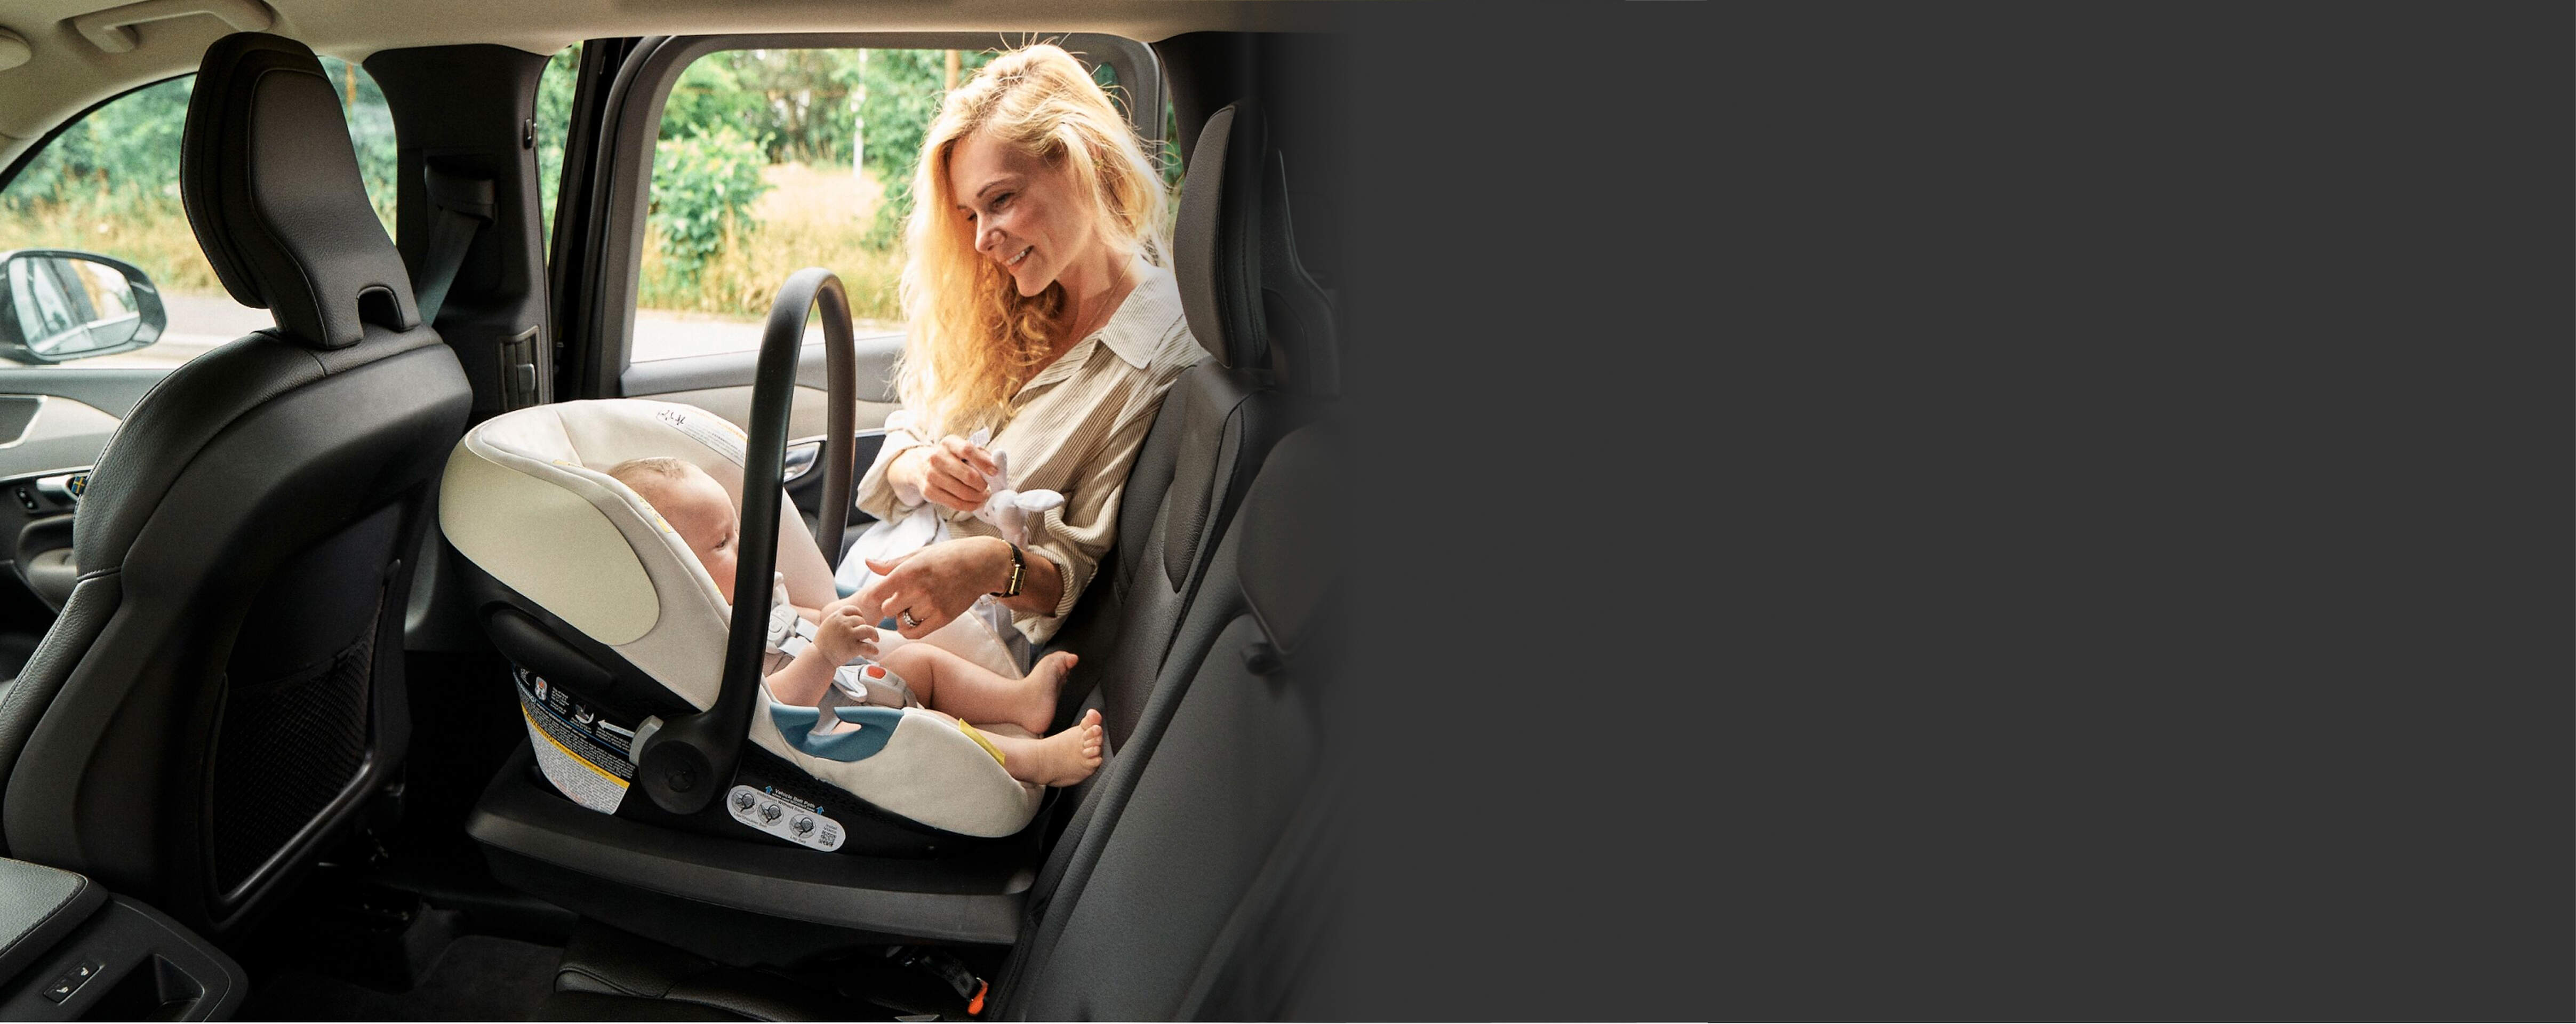 Cybex car seats - how do they compare? - Which? News